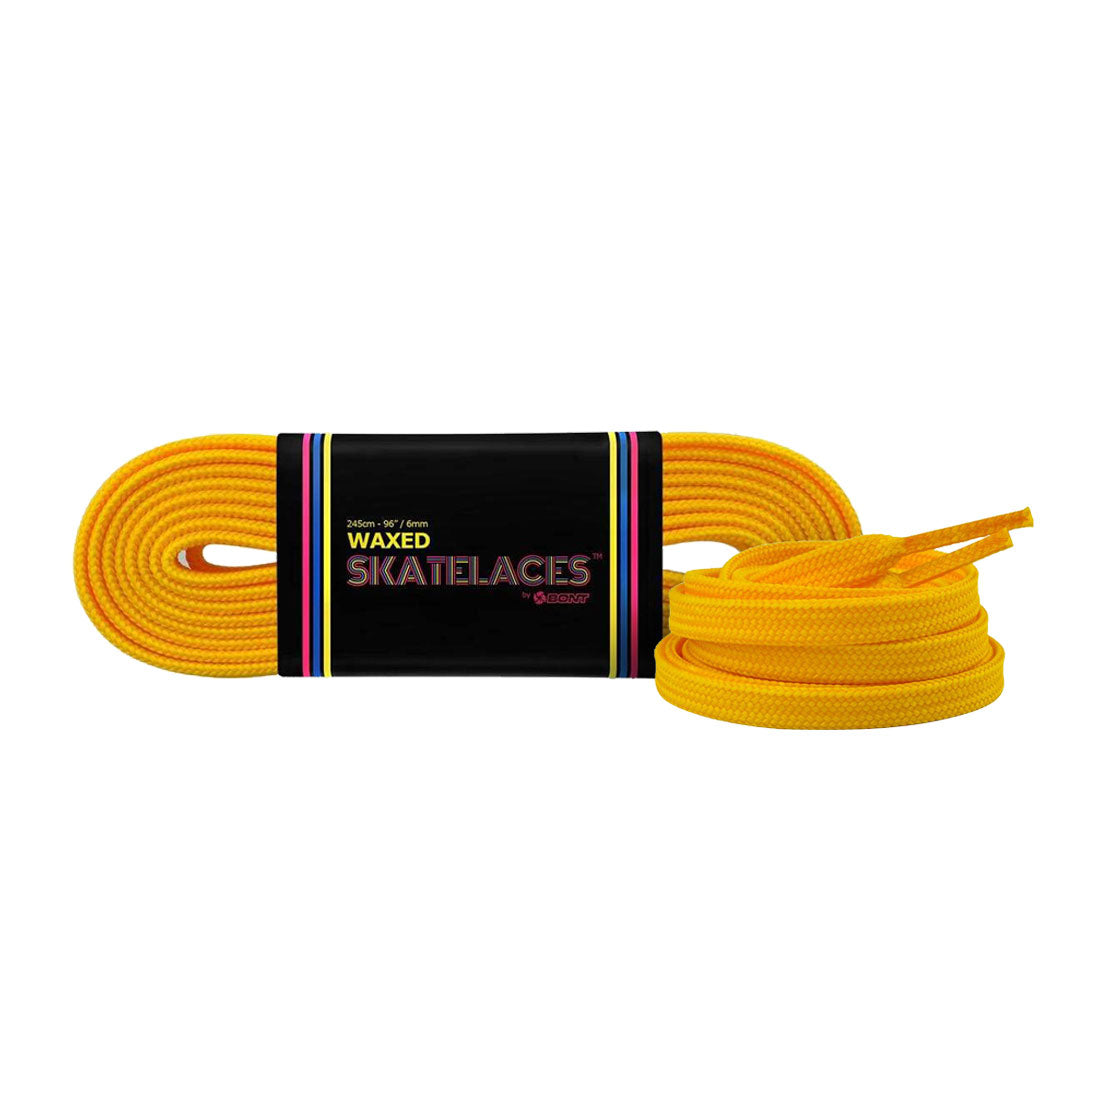 Bont Waxed 6mm Laces - 200cm/79in Bumblebee Yellow Laces